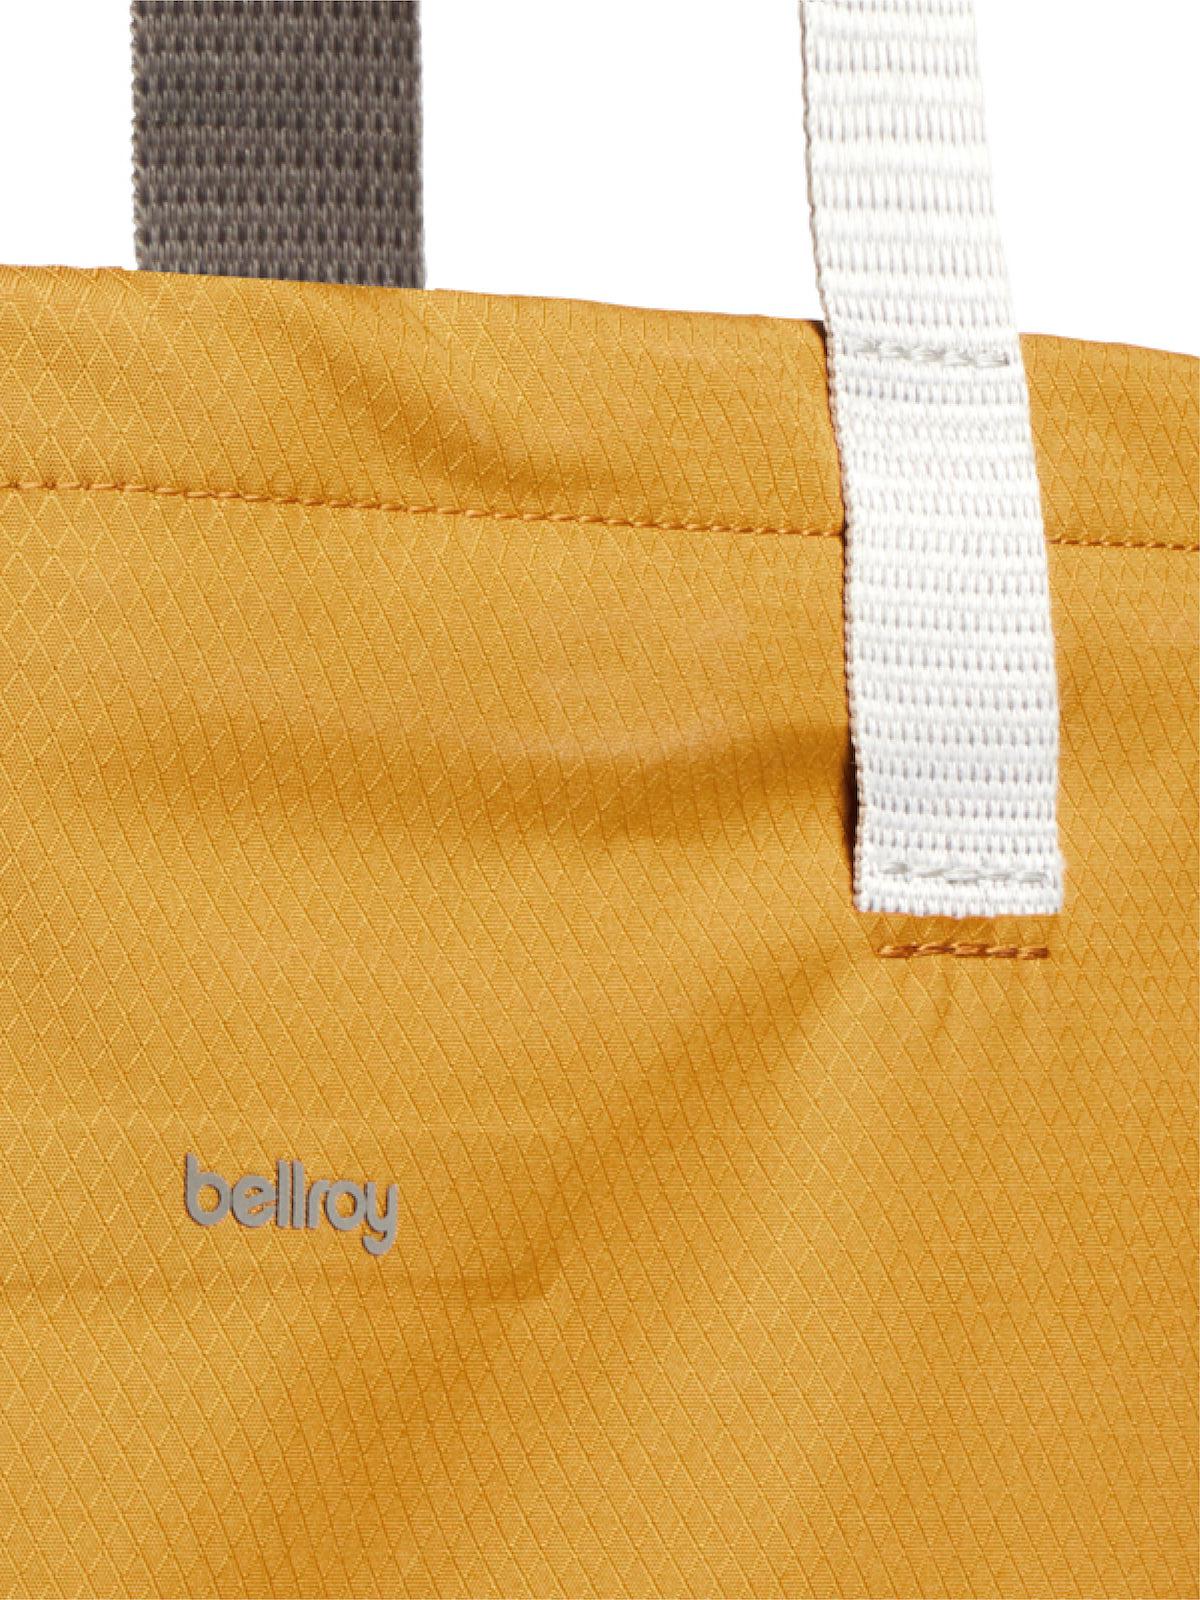 Bellroy Lite Tote Copper (Leather Free)